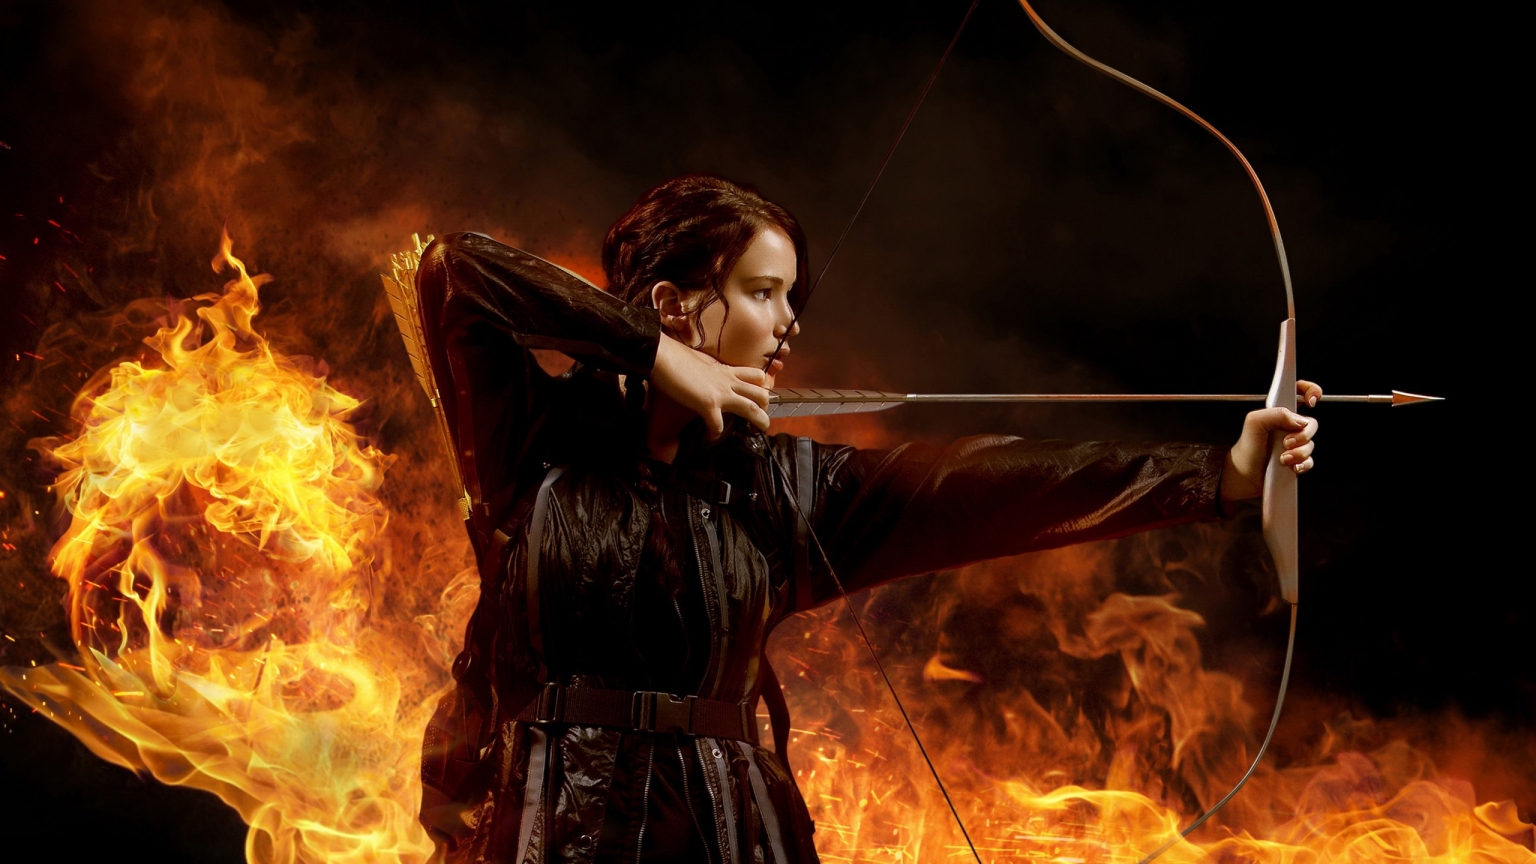 The Hunger Games 2013 for 1536 x 864 HDTV resolution